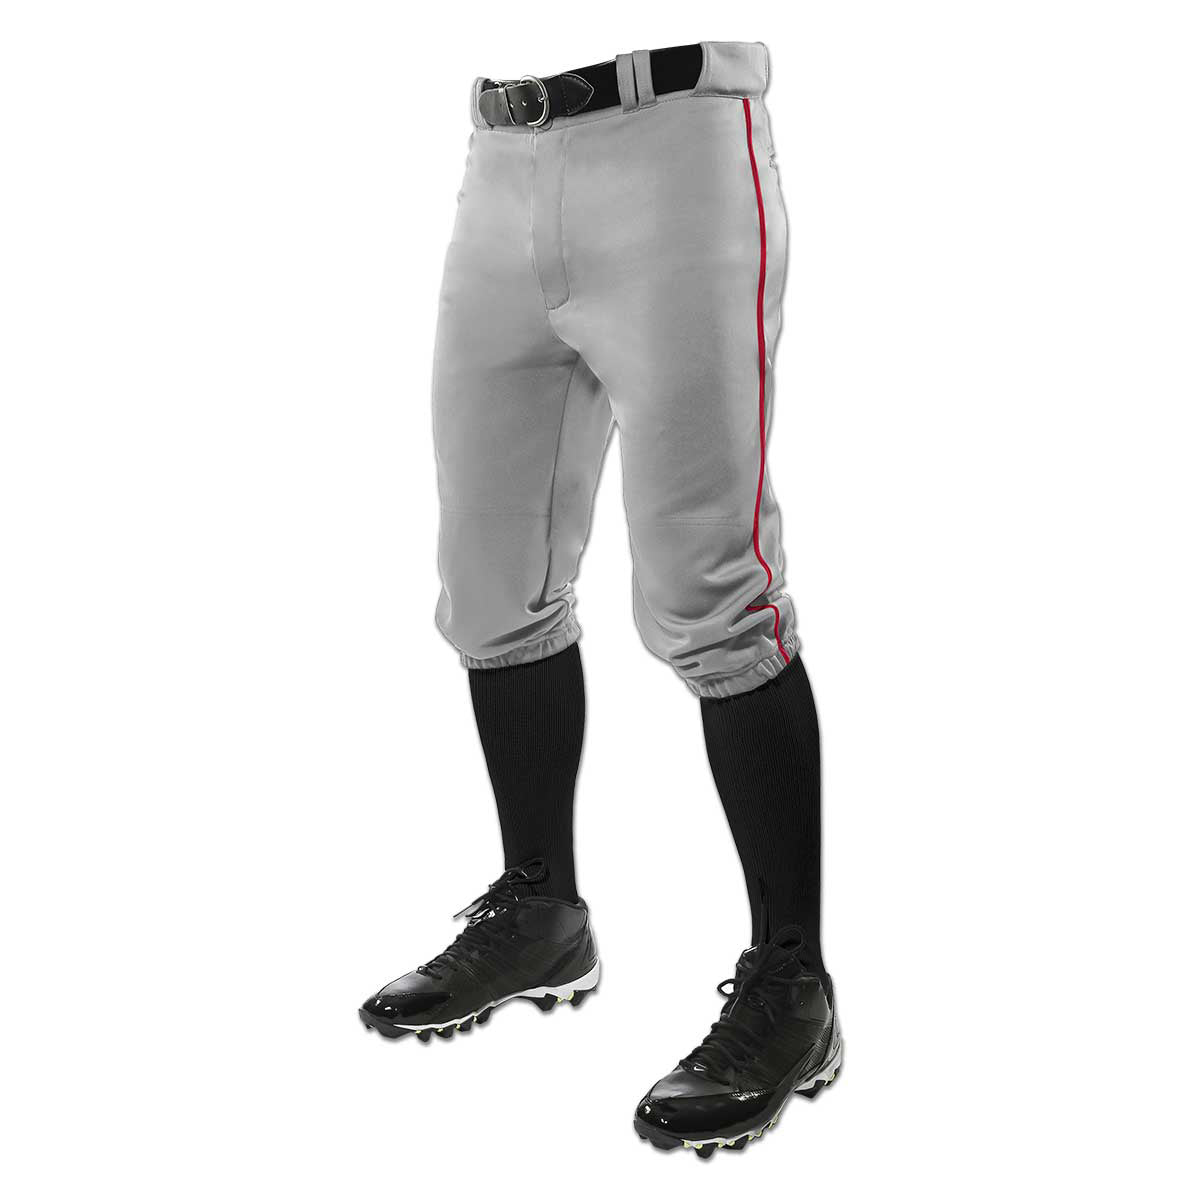 Knicker Knee Length Baseball Pant With Piping GREY BODY, SCARLET PIPE